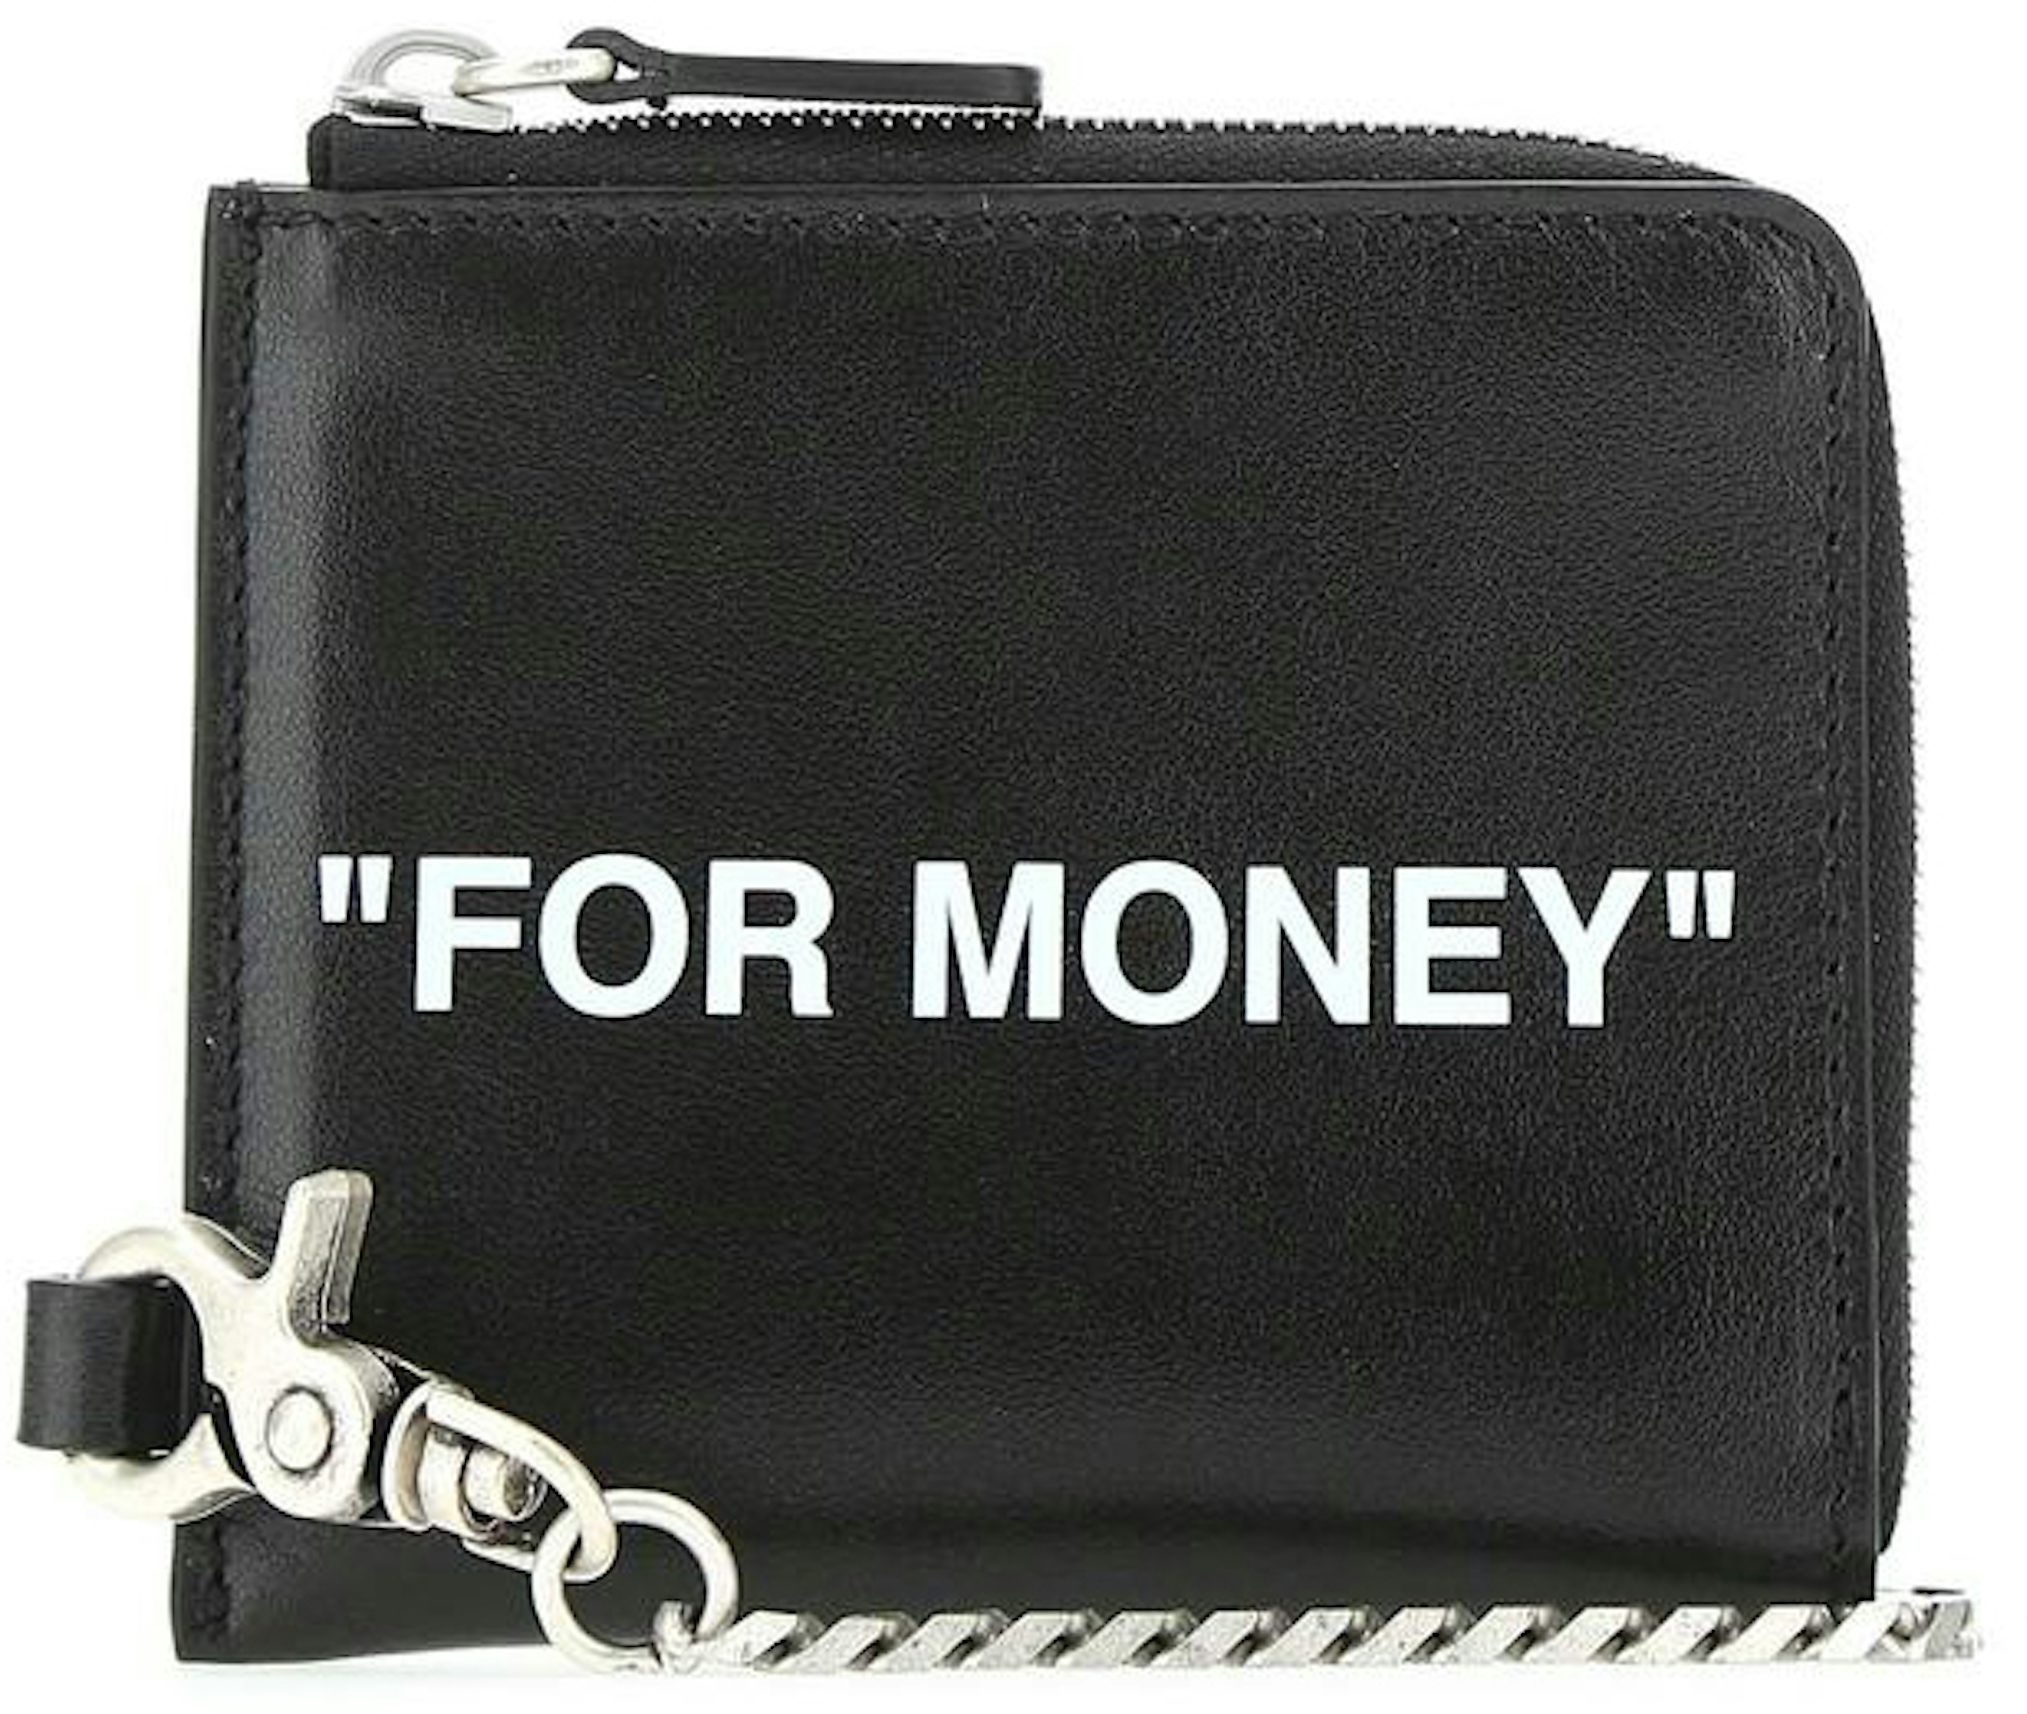 OFF-WHITE 'QUOTE CHAIN WALLET' | WIZSTAND powered by BASE